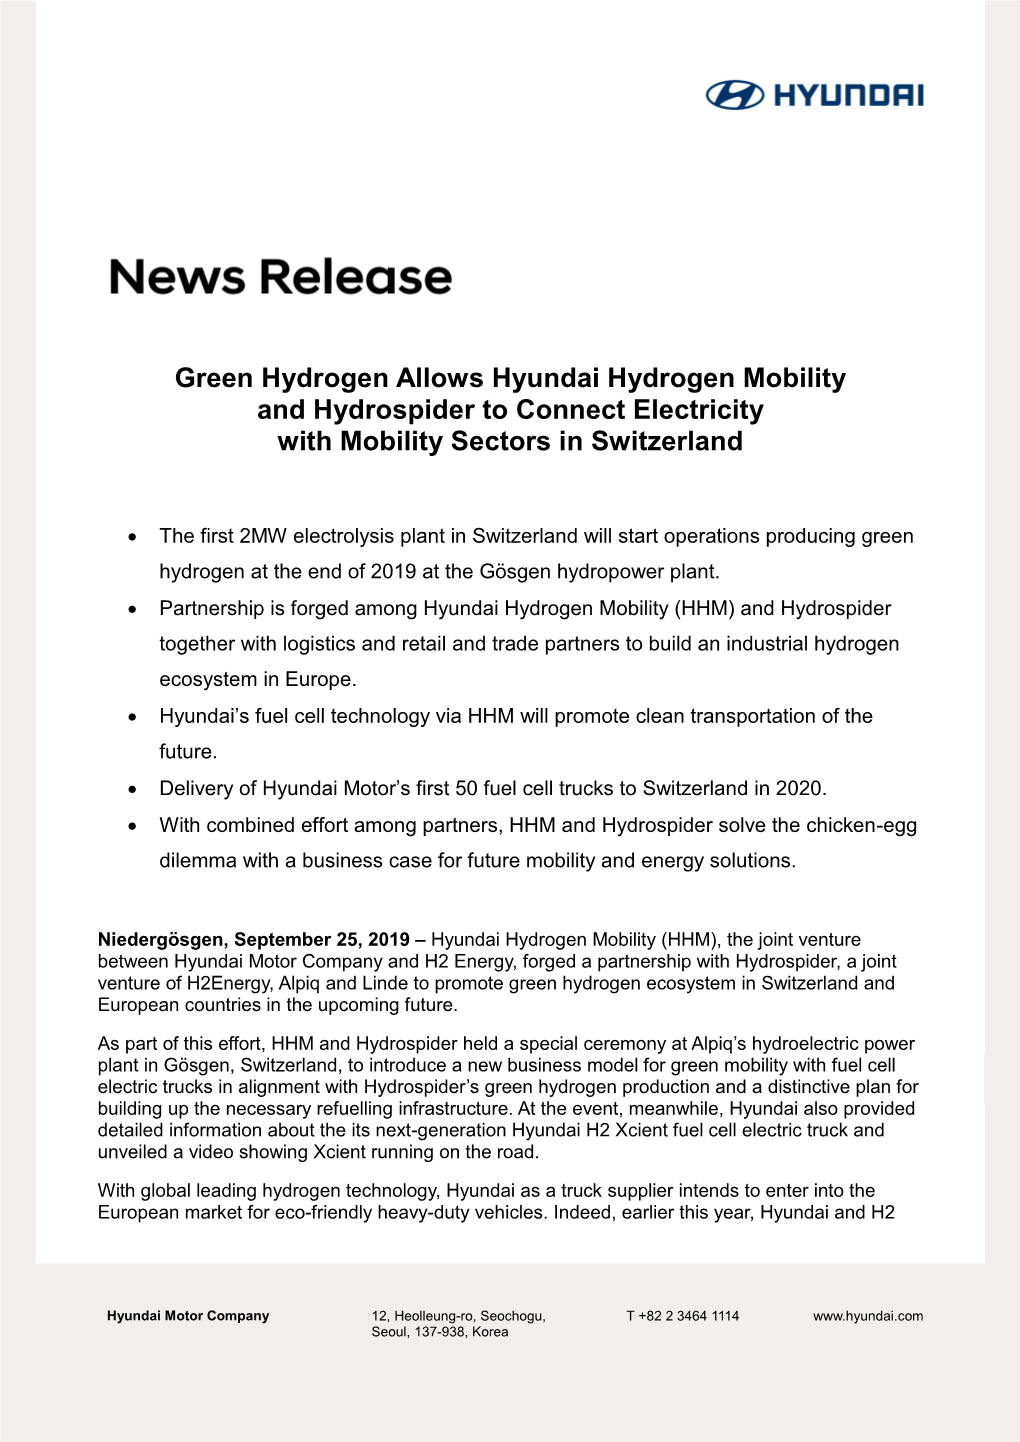 Green Hydrogen Allows Hyundai Hydrogen Mobility and Hydrospider to Connect Electricity with Mobility Sectors in Switzerland